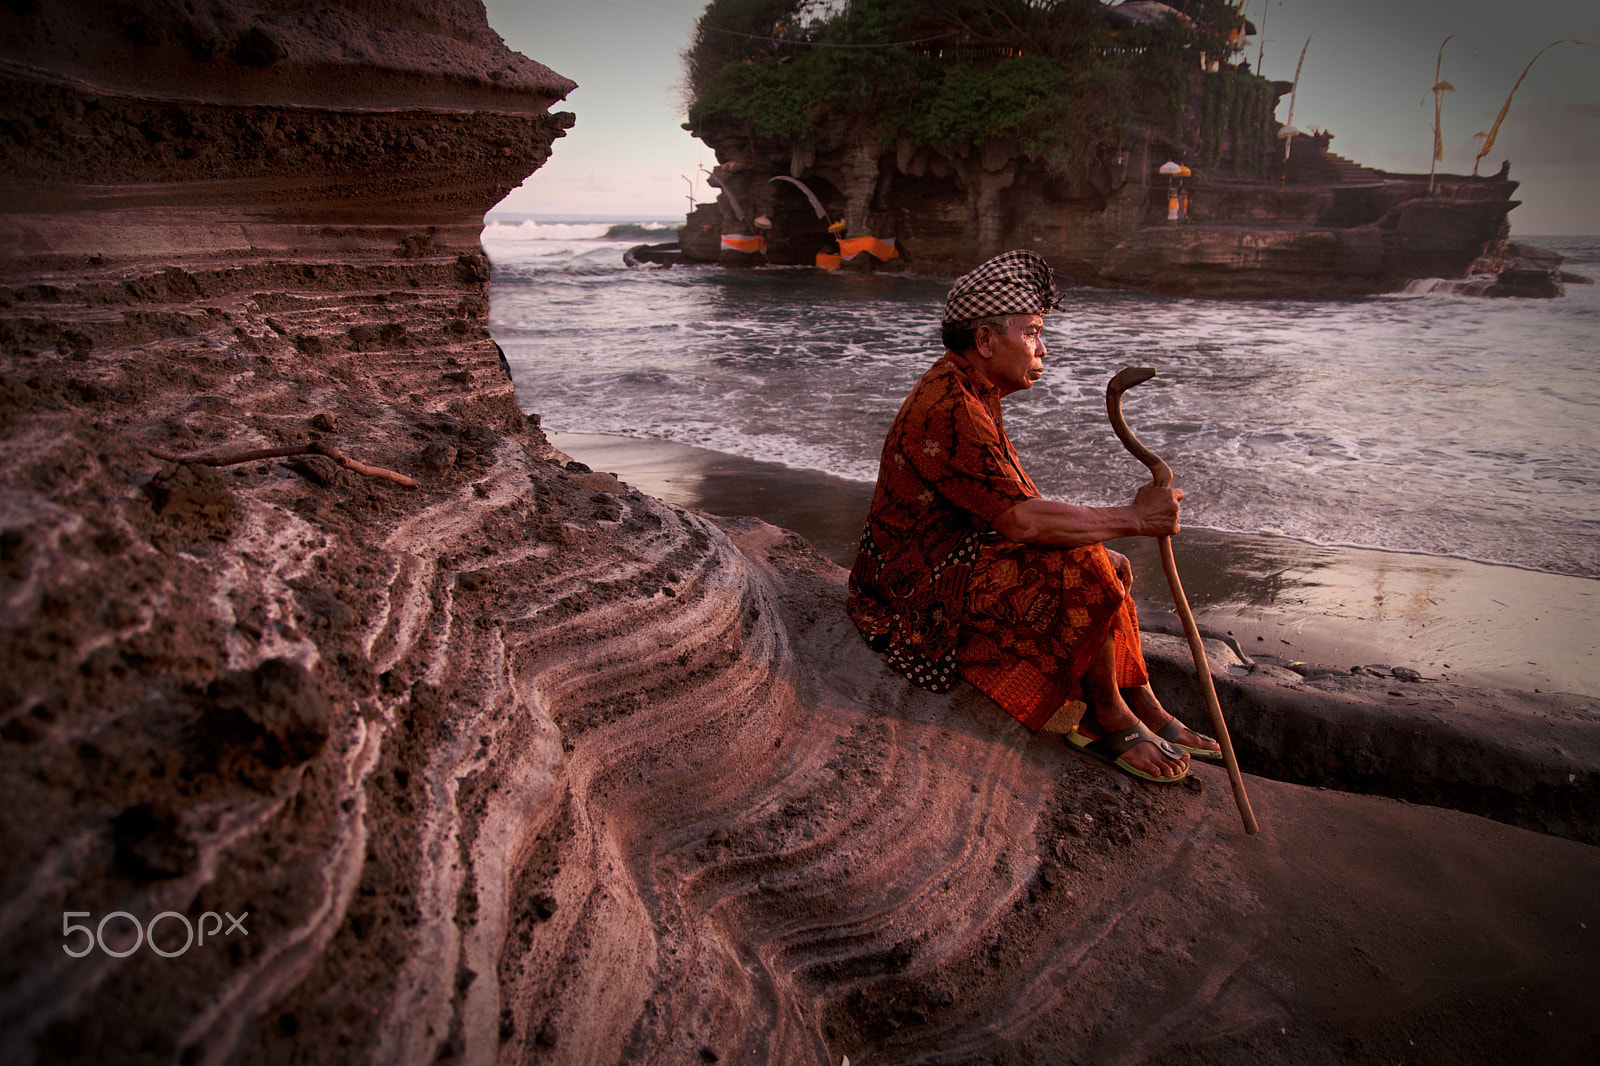 Sony ILCA-77M2 + Tamron SP AF 17-50mm F2.8 XR Di II LD Aspherical (IF) sample photo. The king of tanah lot photography